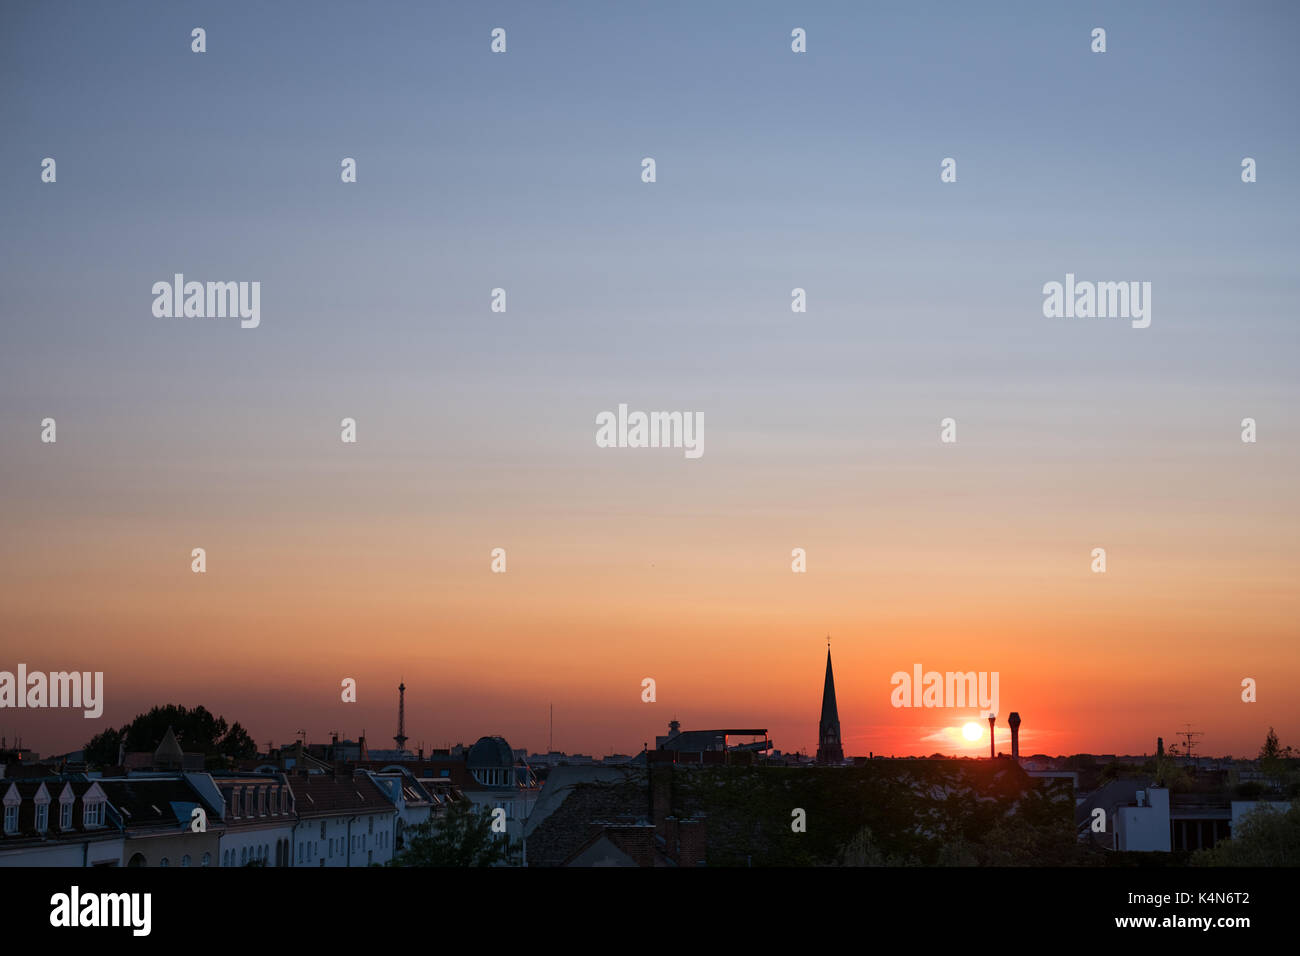 sunset sky over city - colorful sky panorama over rooftops Stock Photo